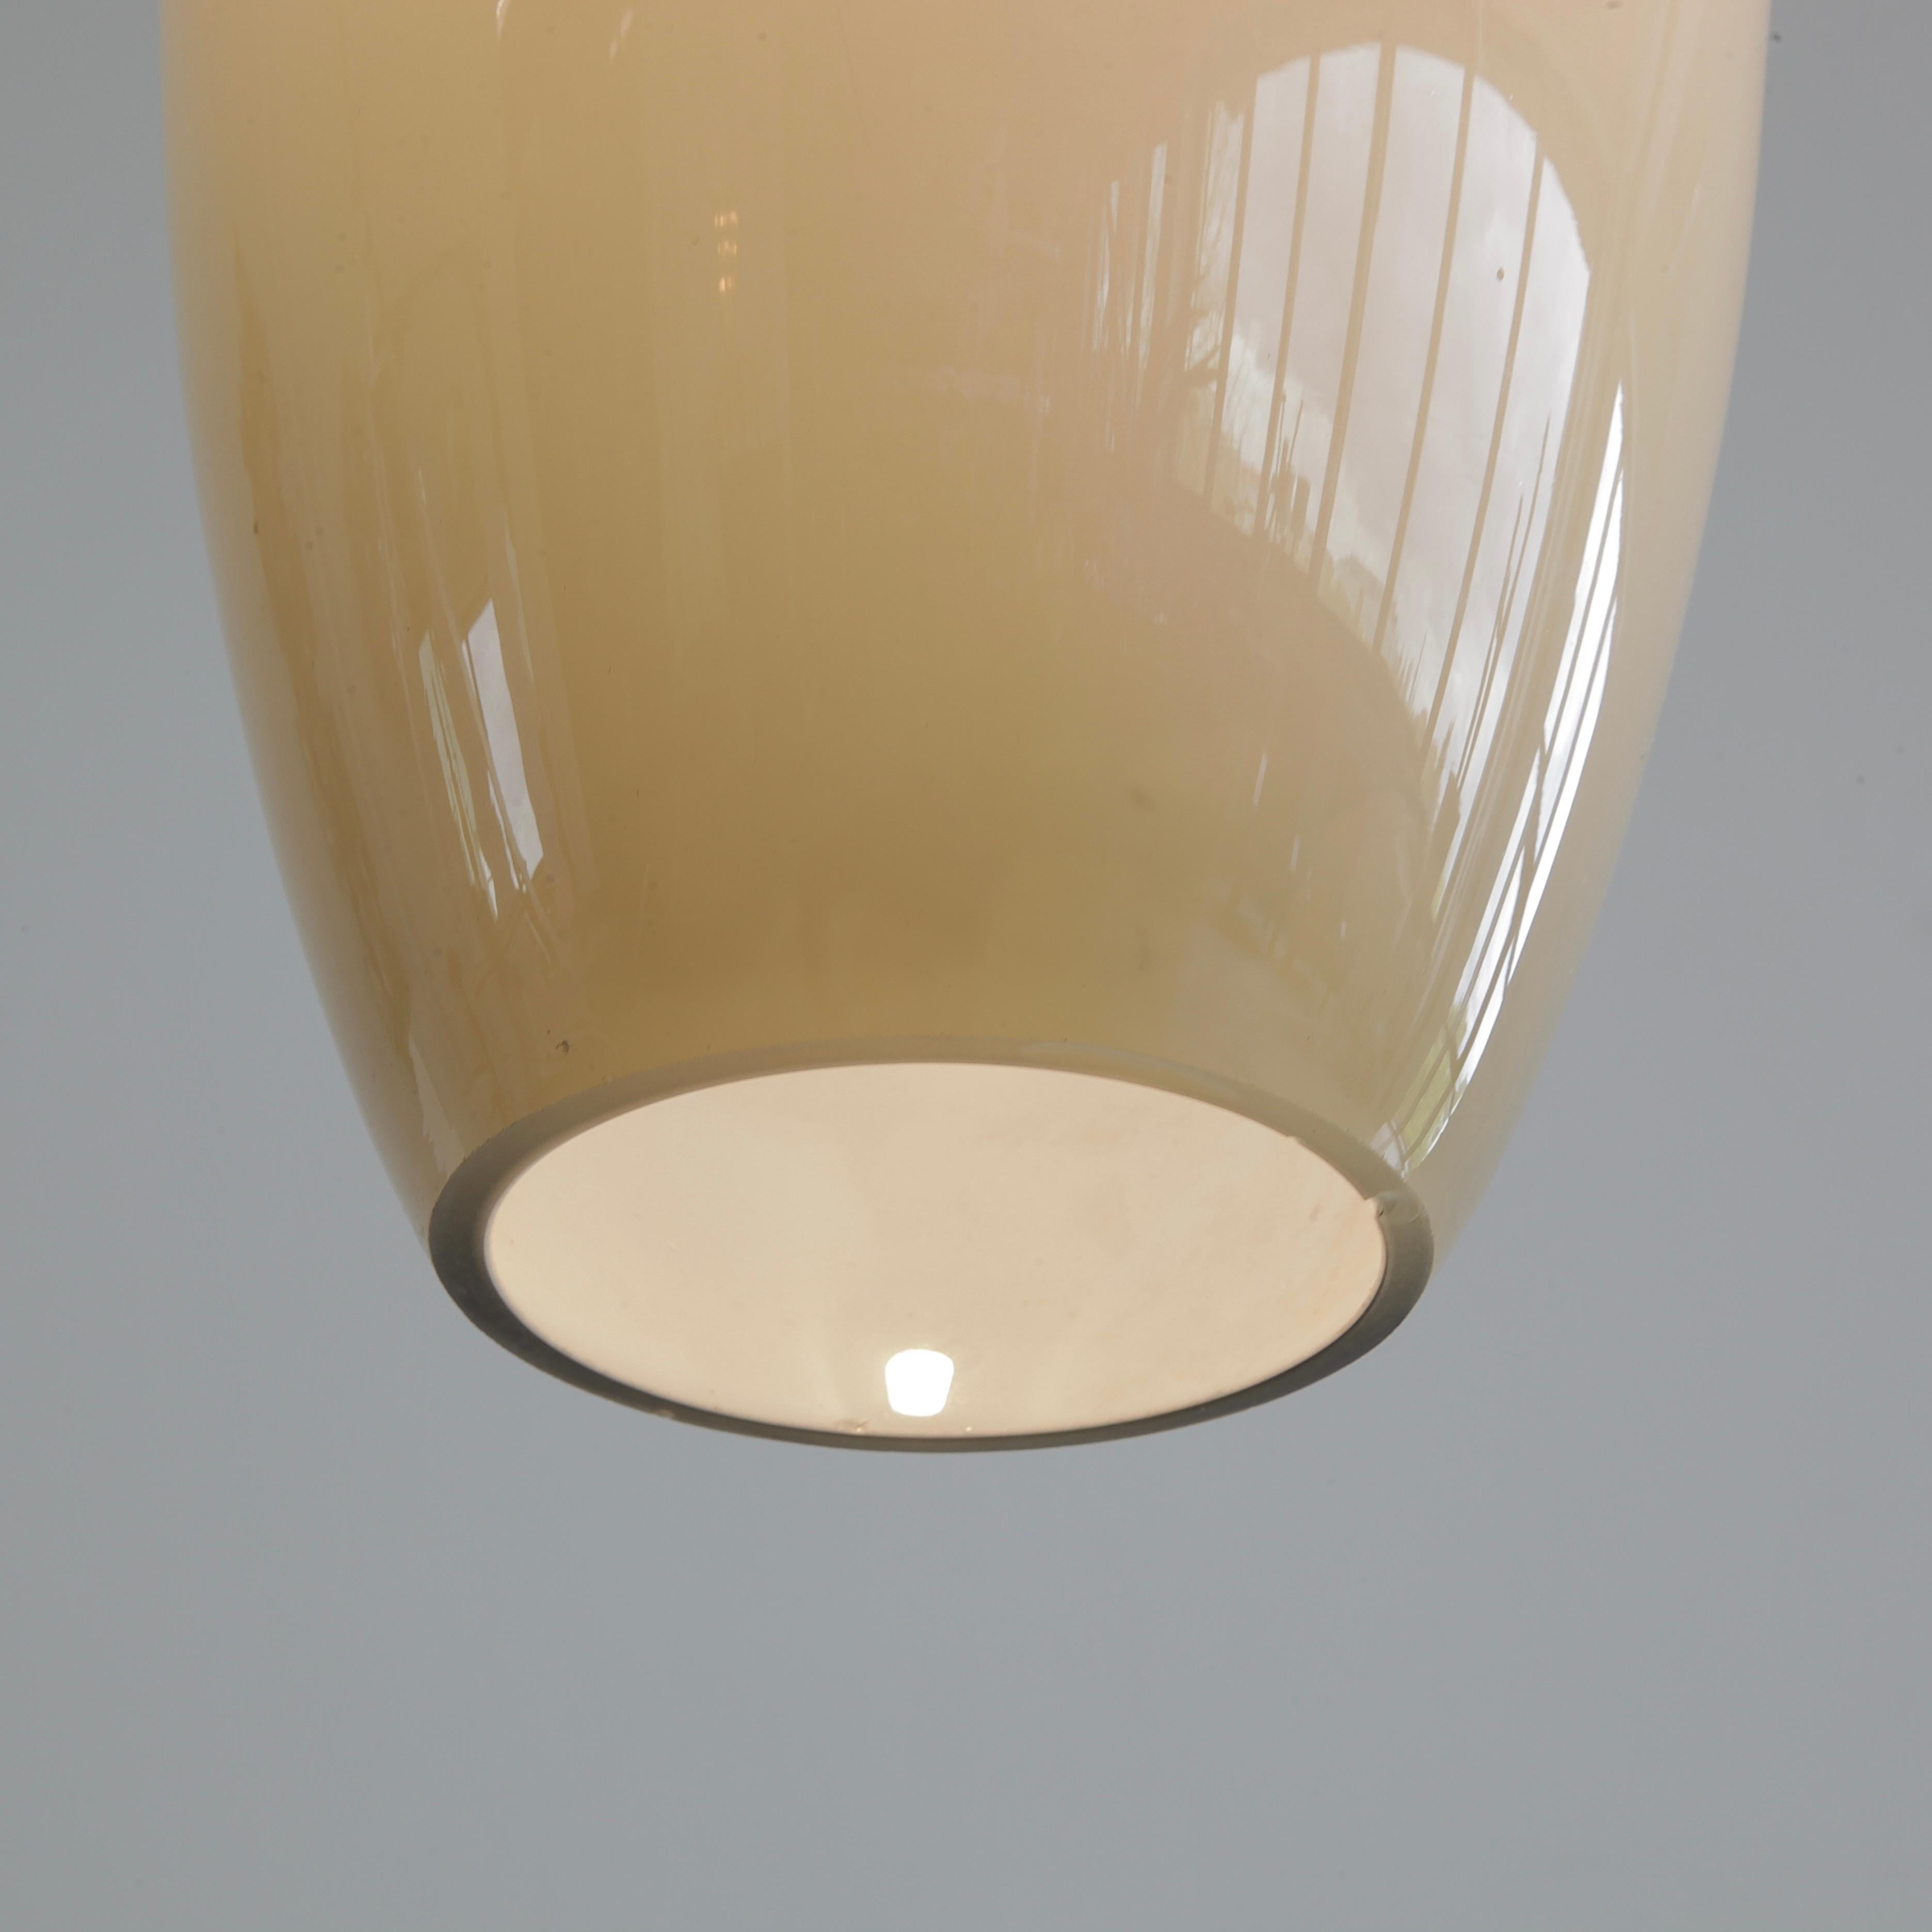 Glass tube pendant by Alessandro Pianon. Italy, Vistosi, 1960s.

Beautifully shaped glass pendant, hand blown on Murano and produced by Vistosi. The glass is of a warm shade of grey with white lining on the inside. One light fitting has three